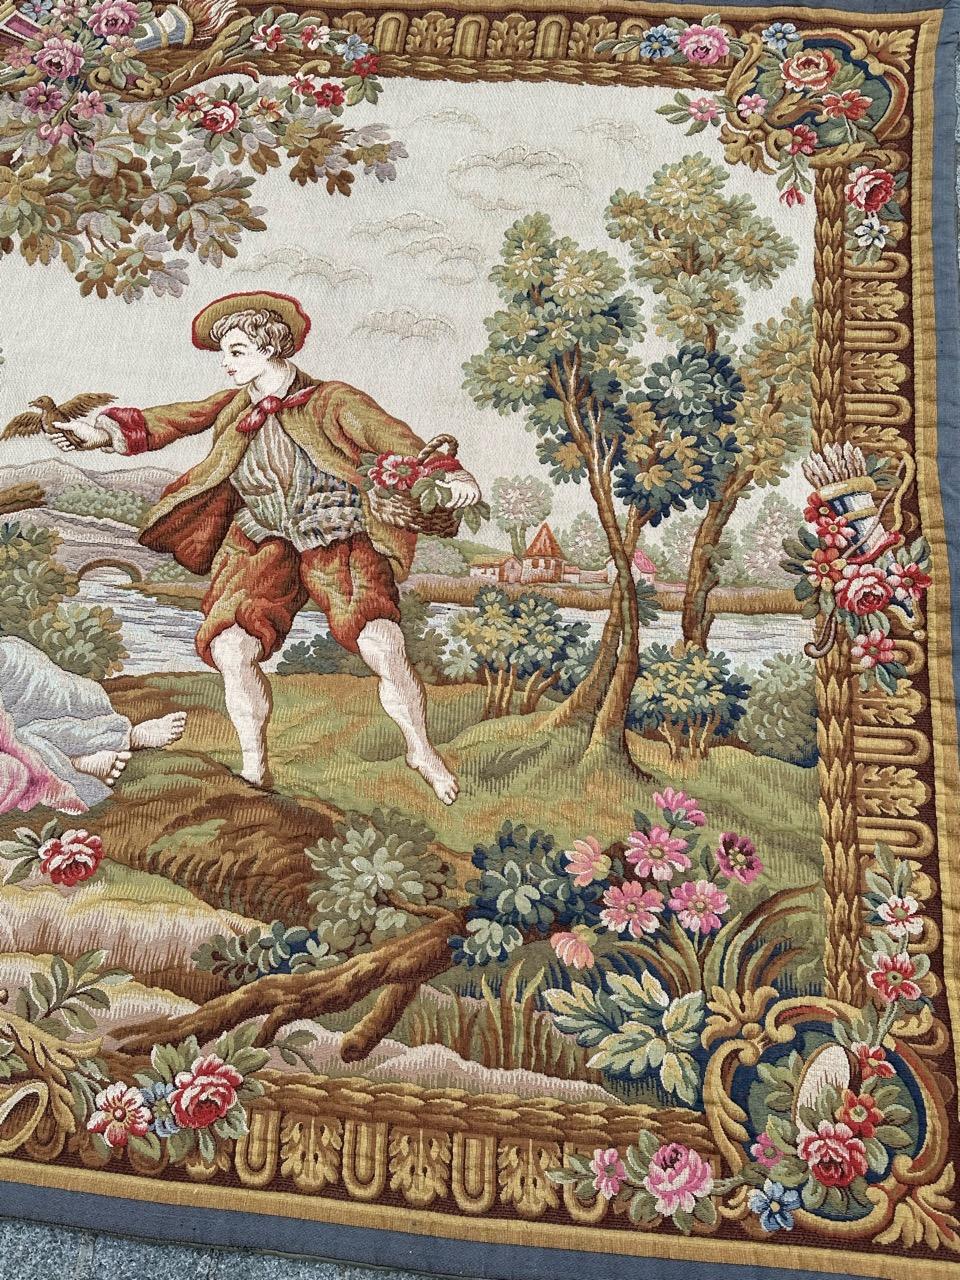 Exceptional mid-20th-century French tapestry woven on Jacquard looms in Halluin stitch with wool and cotton. Inspired by François Boucher, it depicts a gentleman presenting a bird to two ladies in a scenic setting with flowers, trees, and a river.